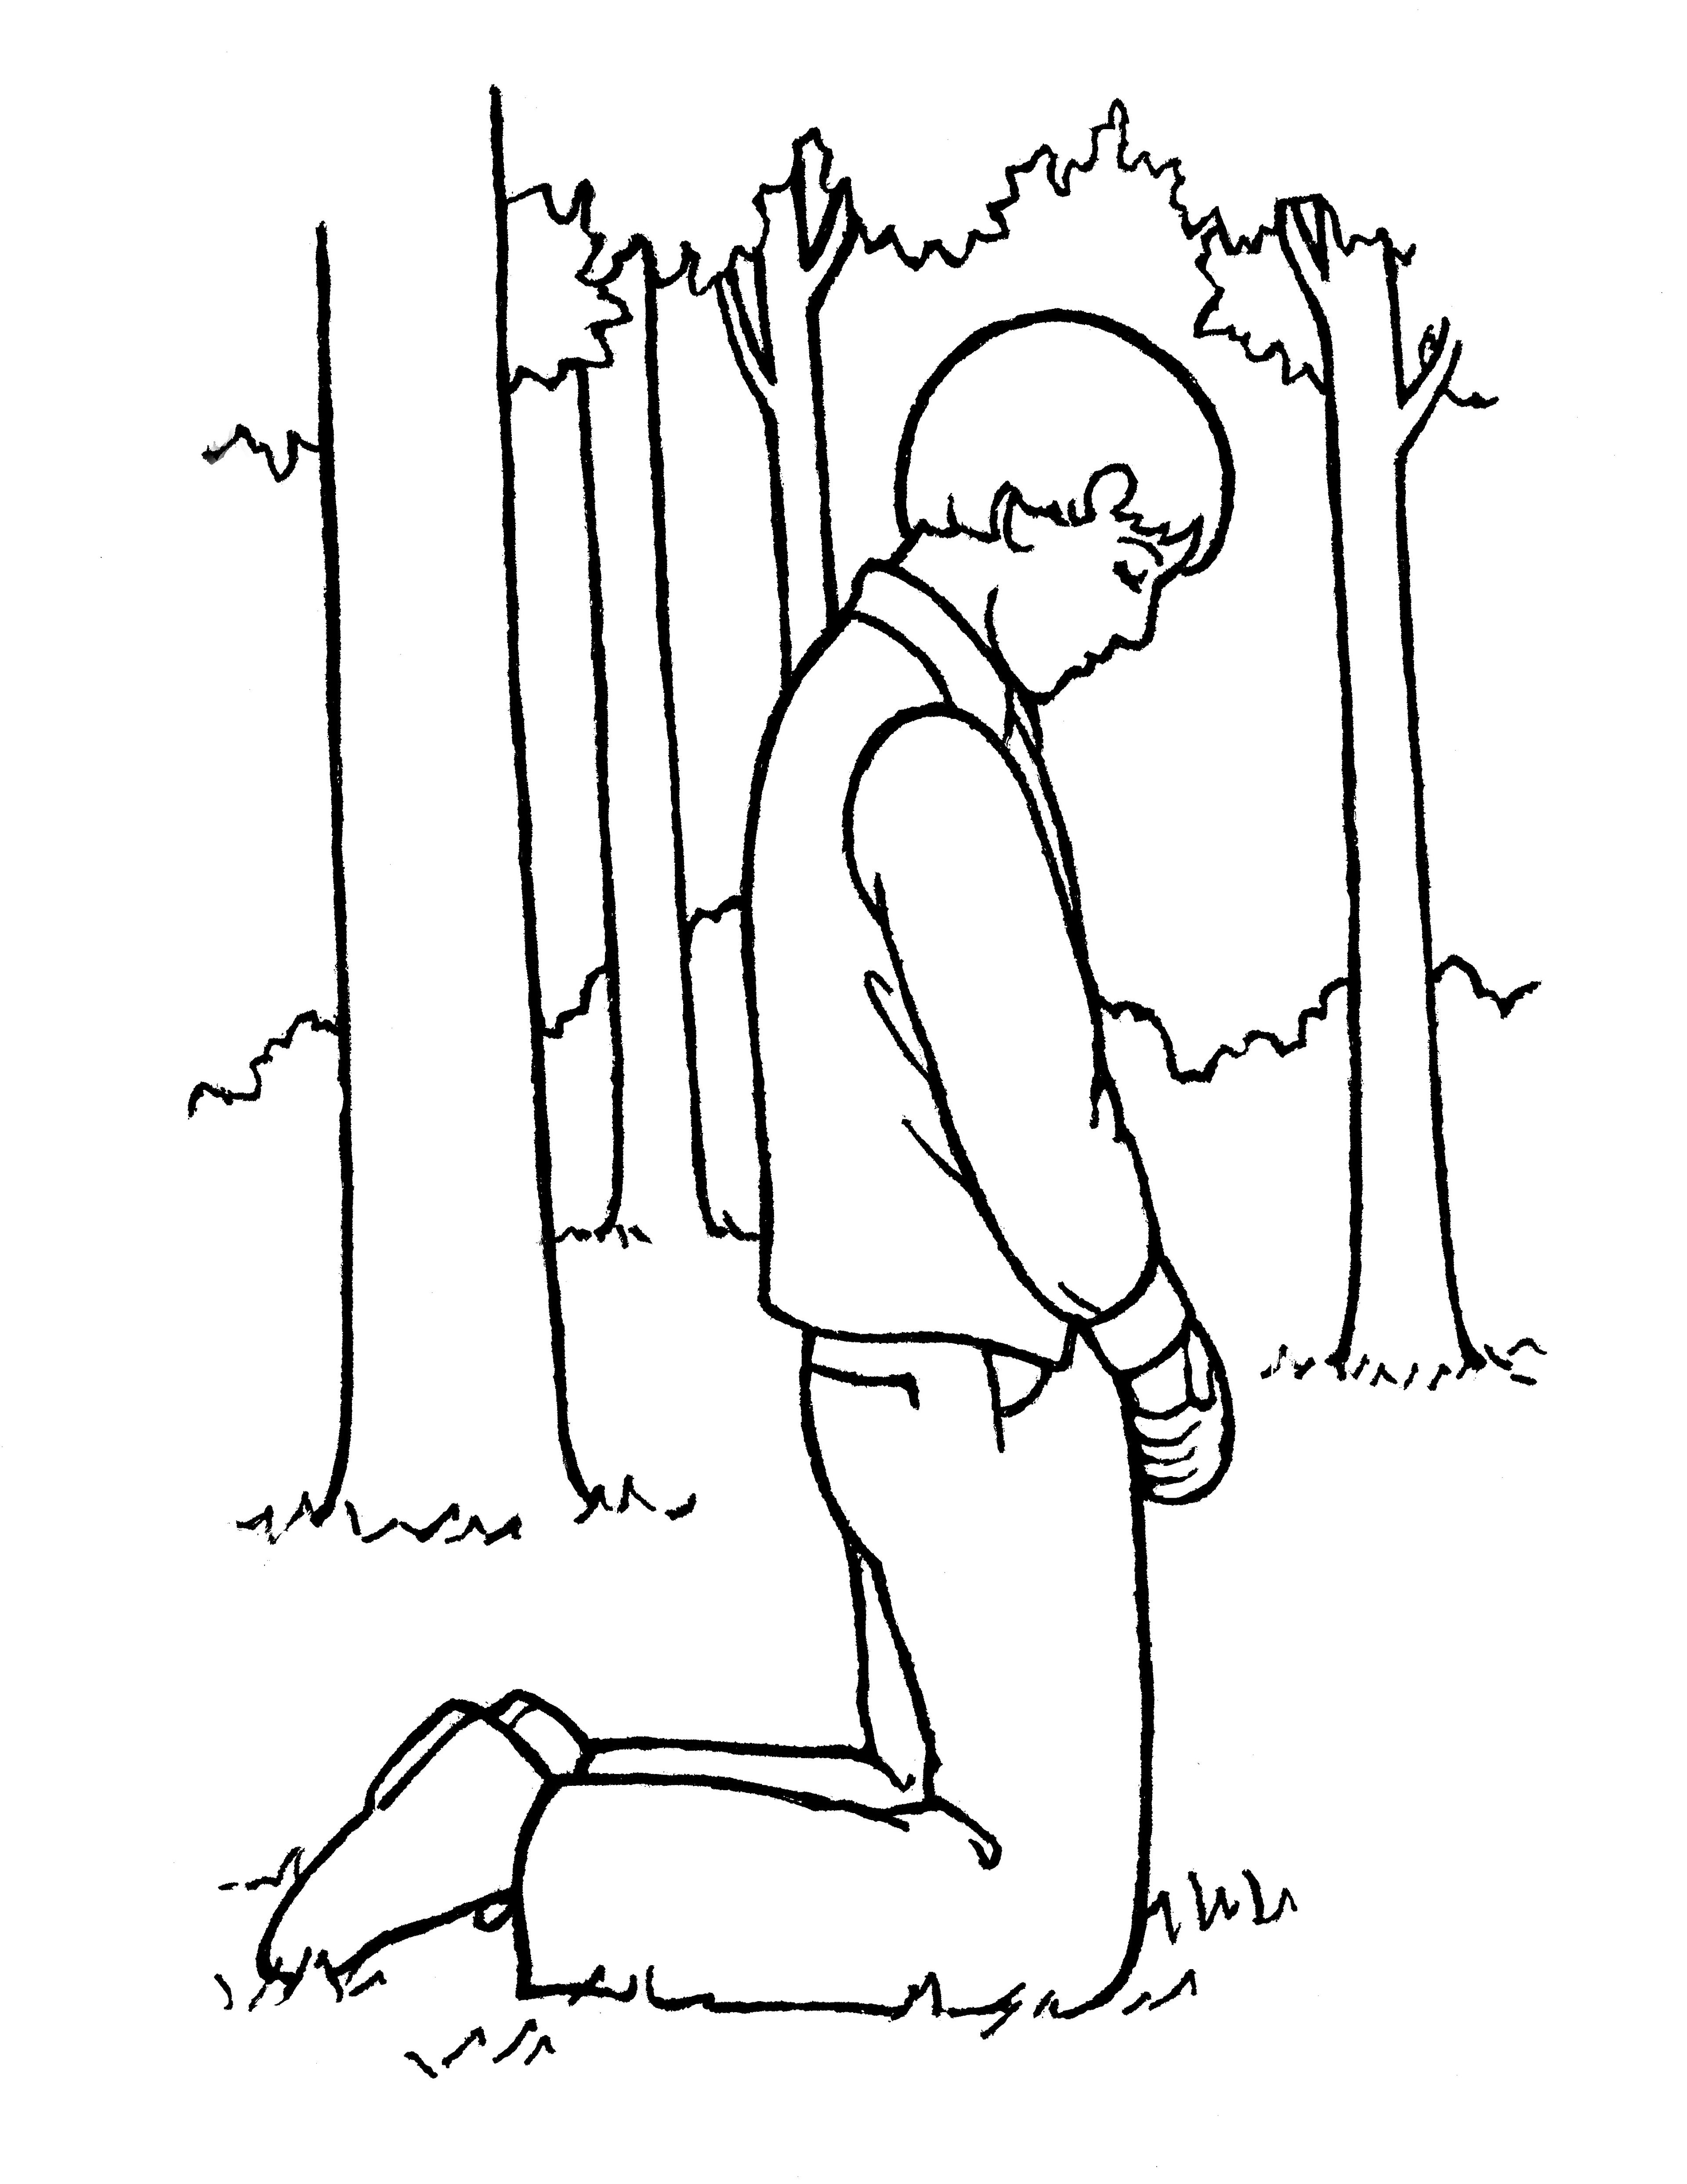 An illustration of Joseph Smith praying in the Sacred Grove prior to the First Vision, from the nursery manual Behold Your Little Ones (2008), page 91.